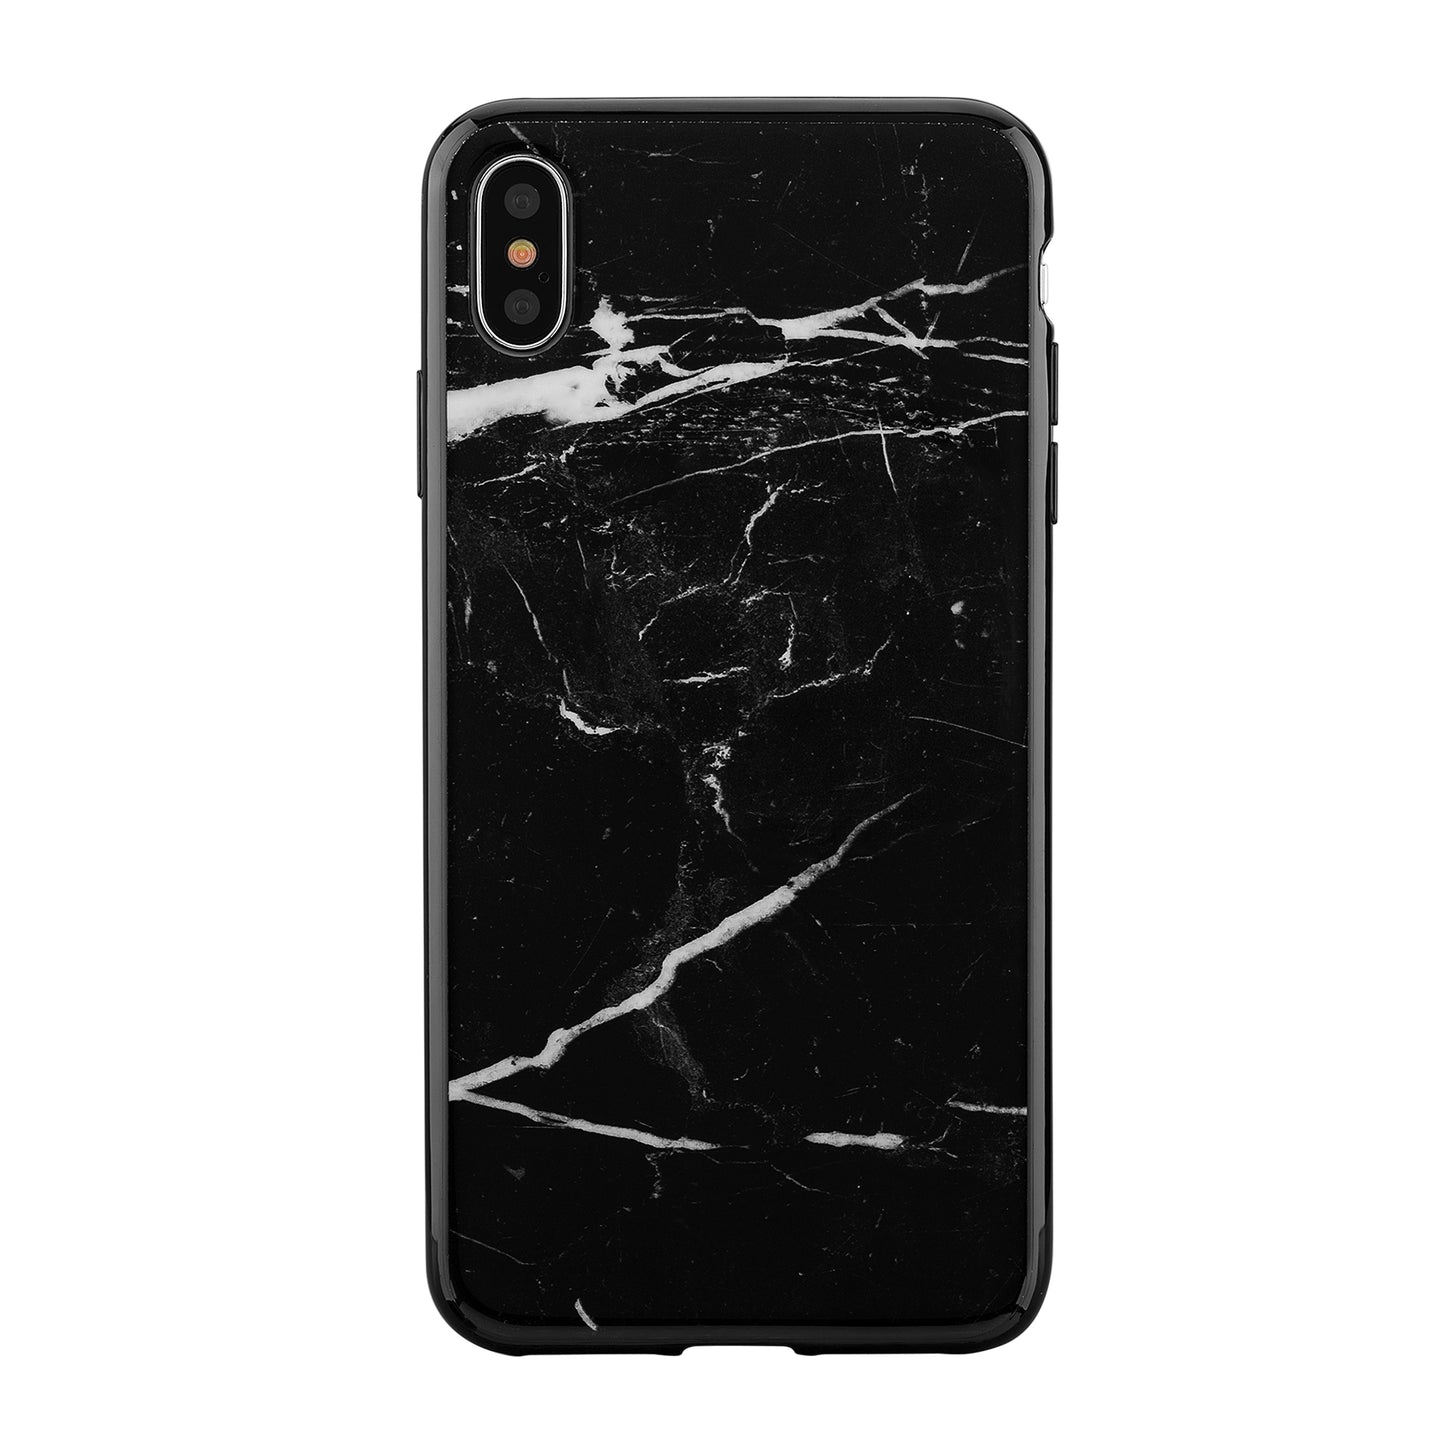 Mist Fashion Case Black Marble for iPhone XS Max